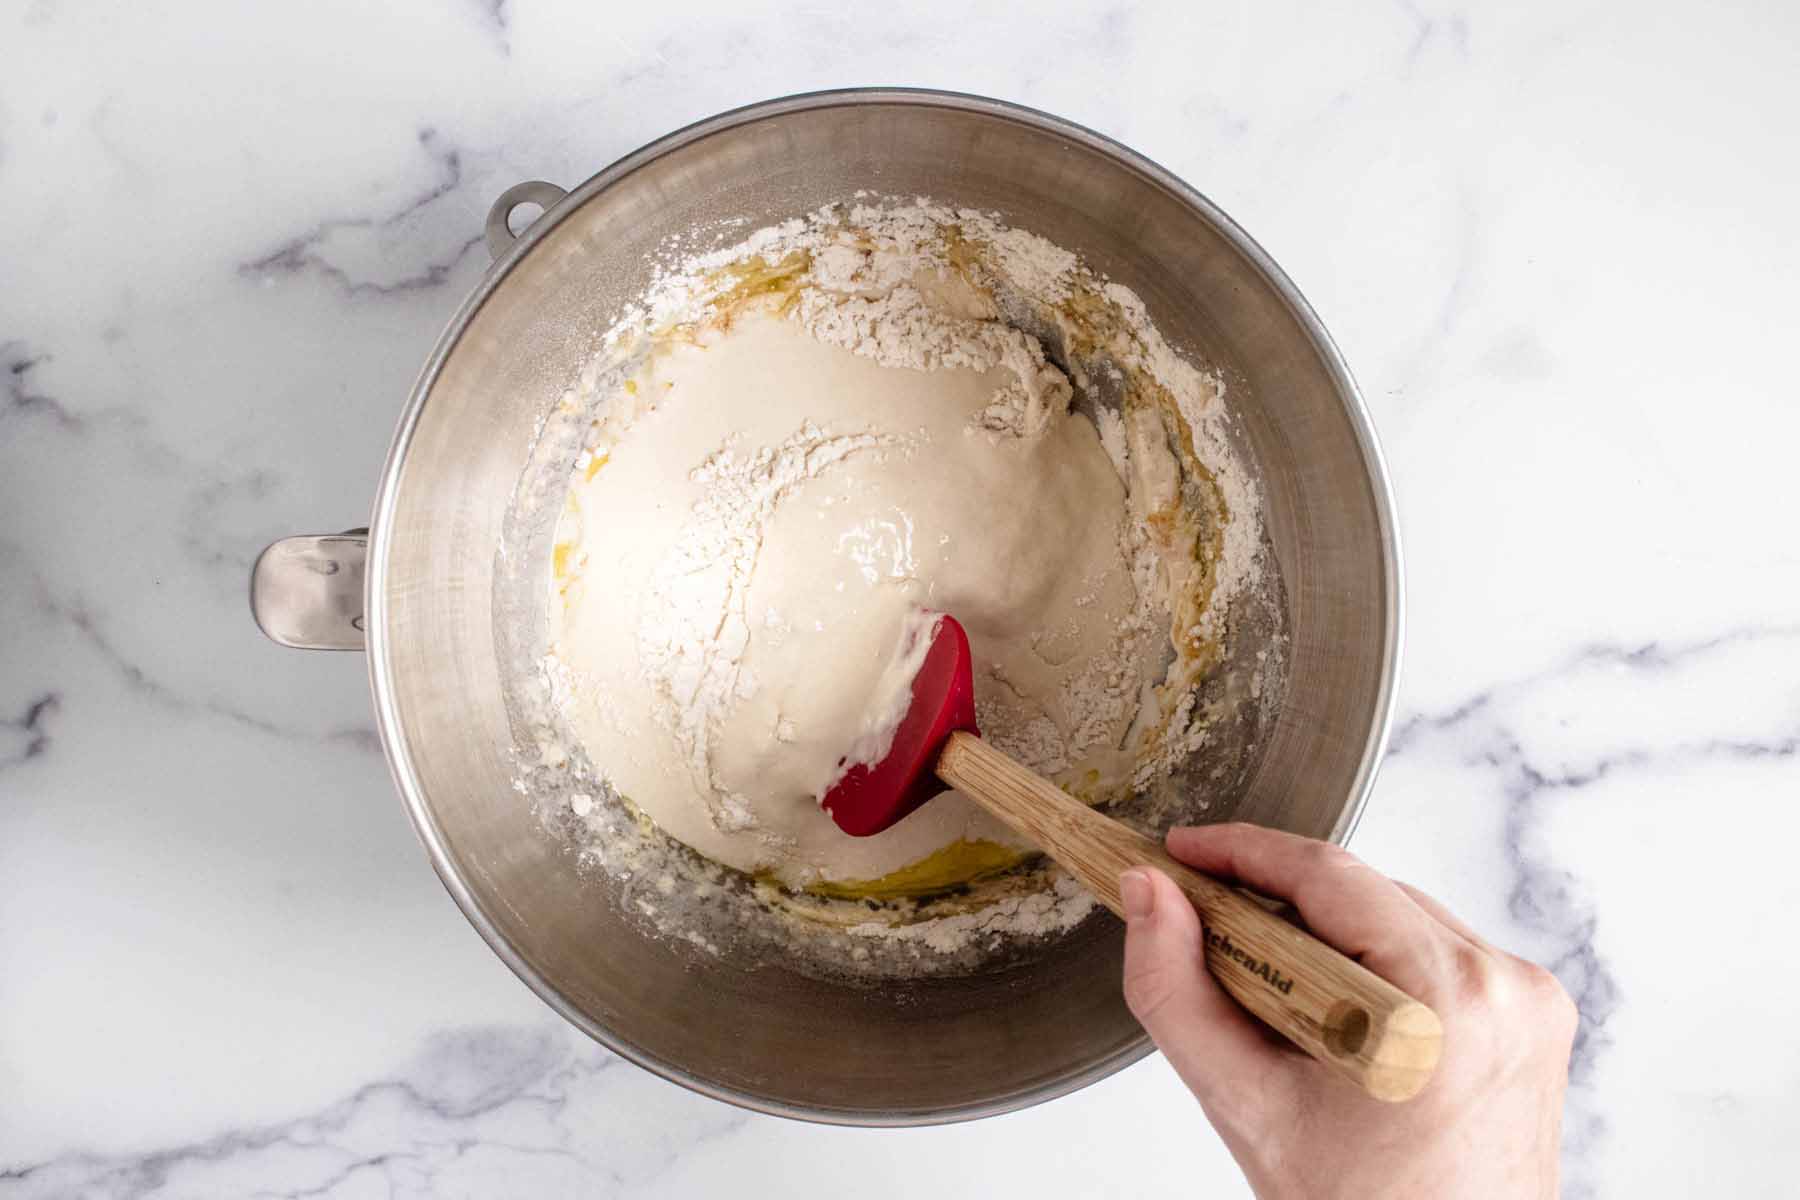 Pizza dough ingredients in a mixing bowl being combined with a rubber spatula